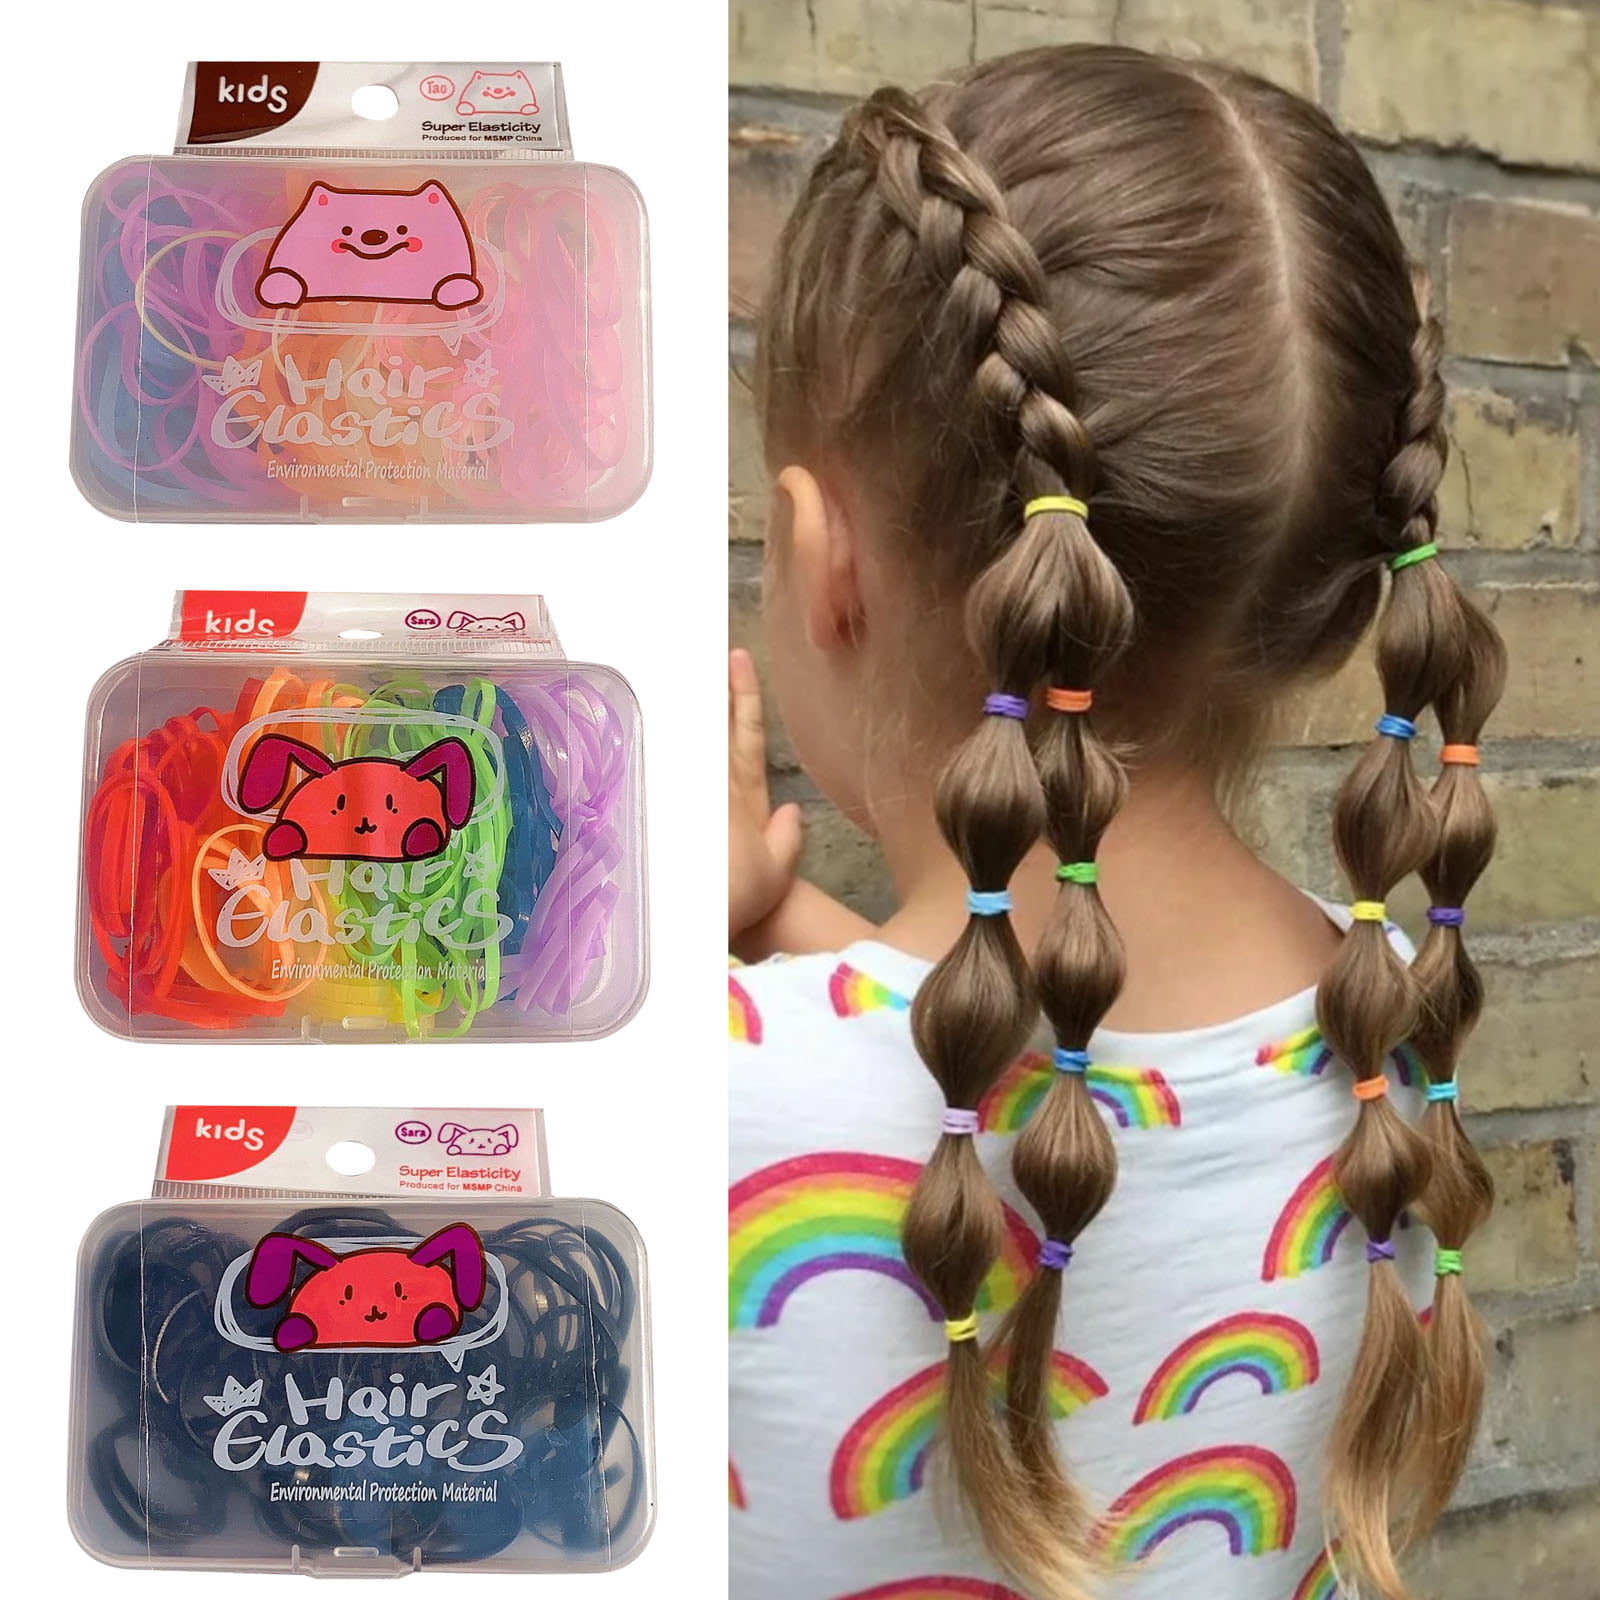 Small Rubber Band Children's Hair Tied Color High Elasticity R1D1 